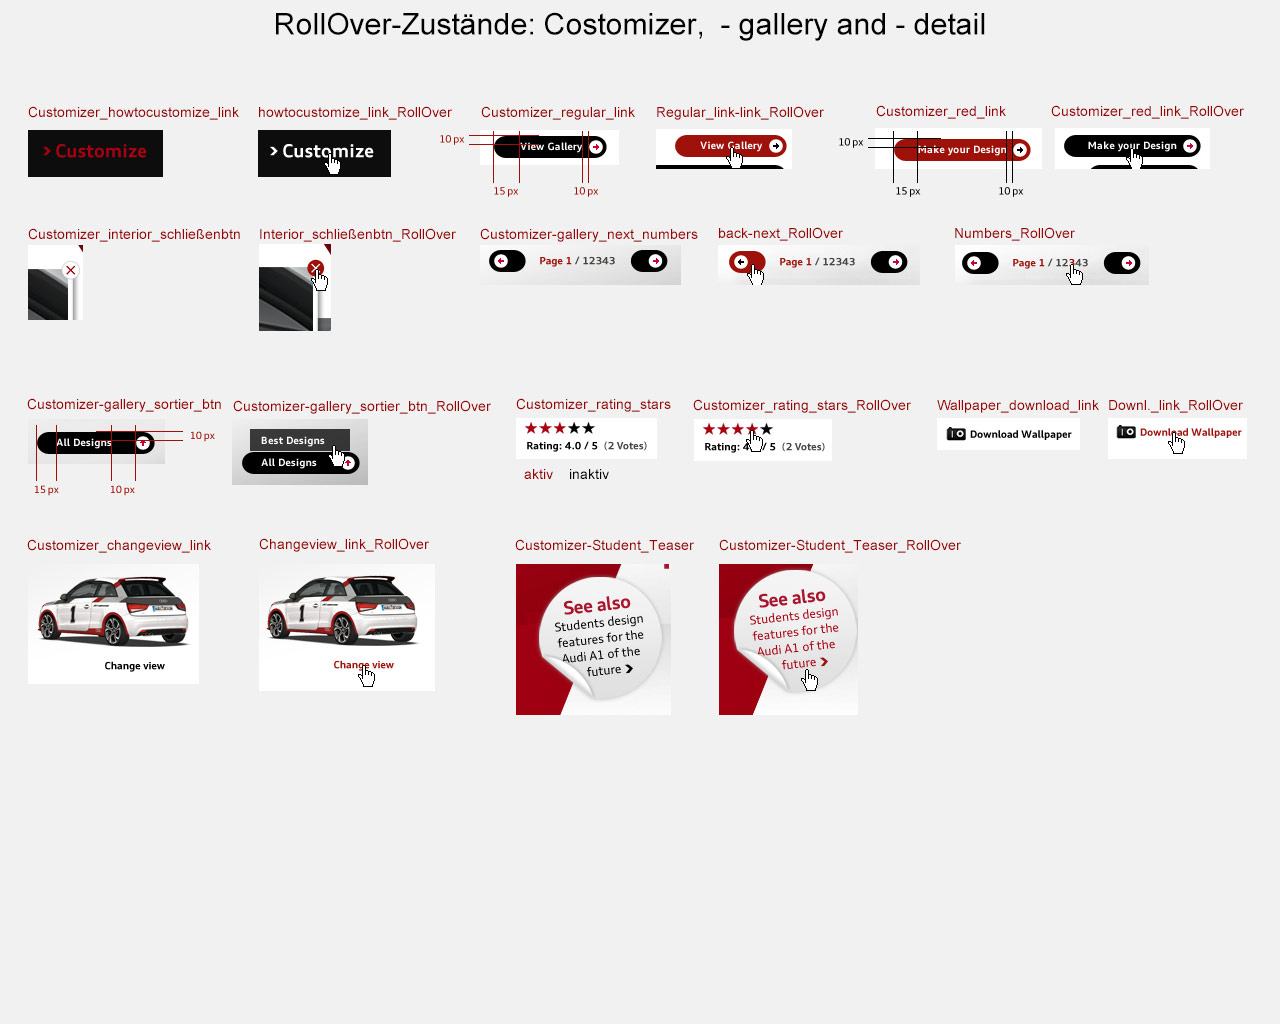 03_RollOver_guide_Customizer_Customgallery_Customdetail